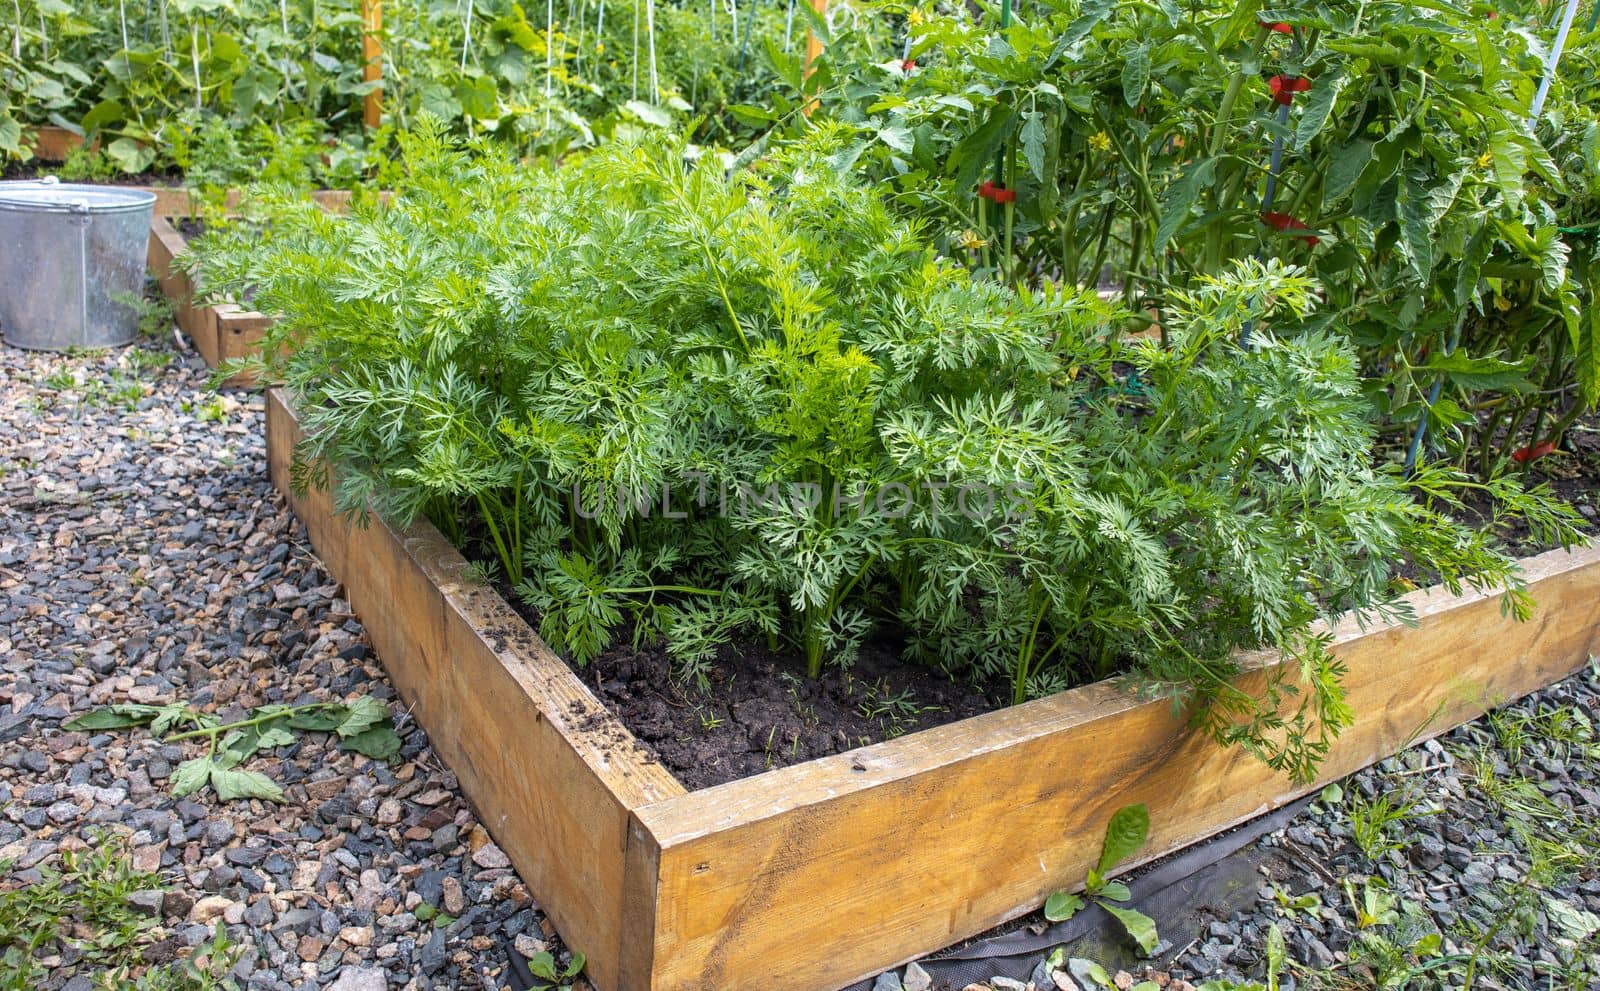 Growing vegetables on a raised wooden bed in the backyard garden, vegetable growing concept by claire_lucia